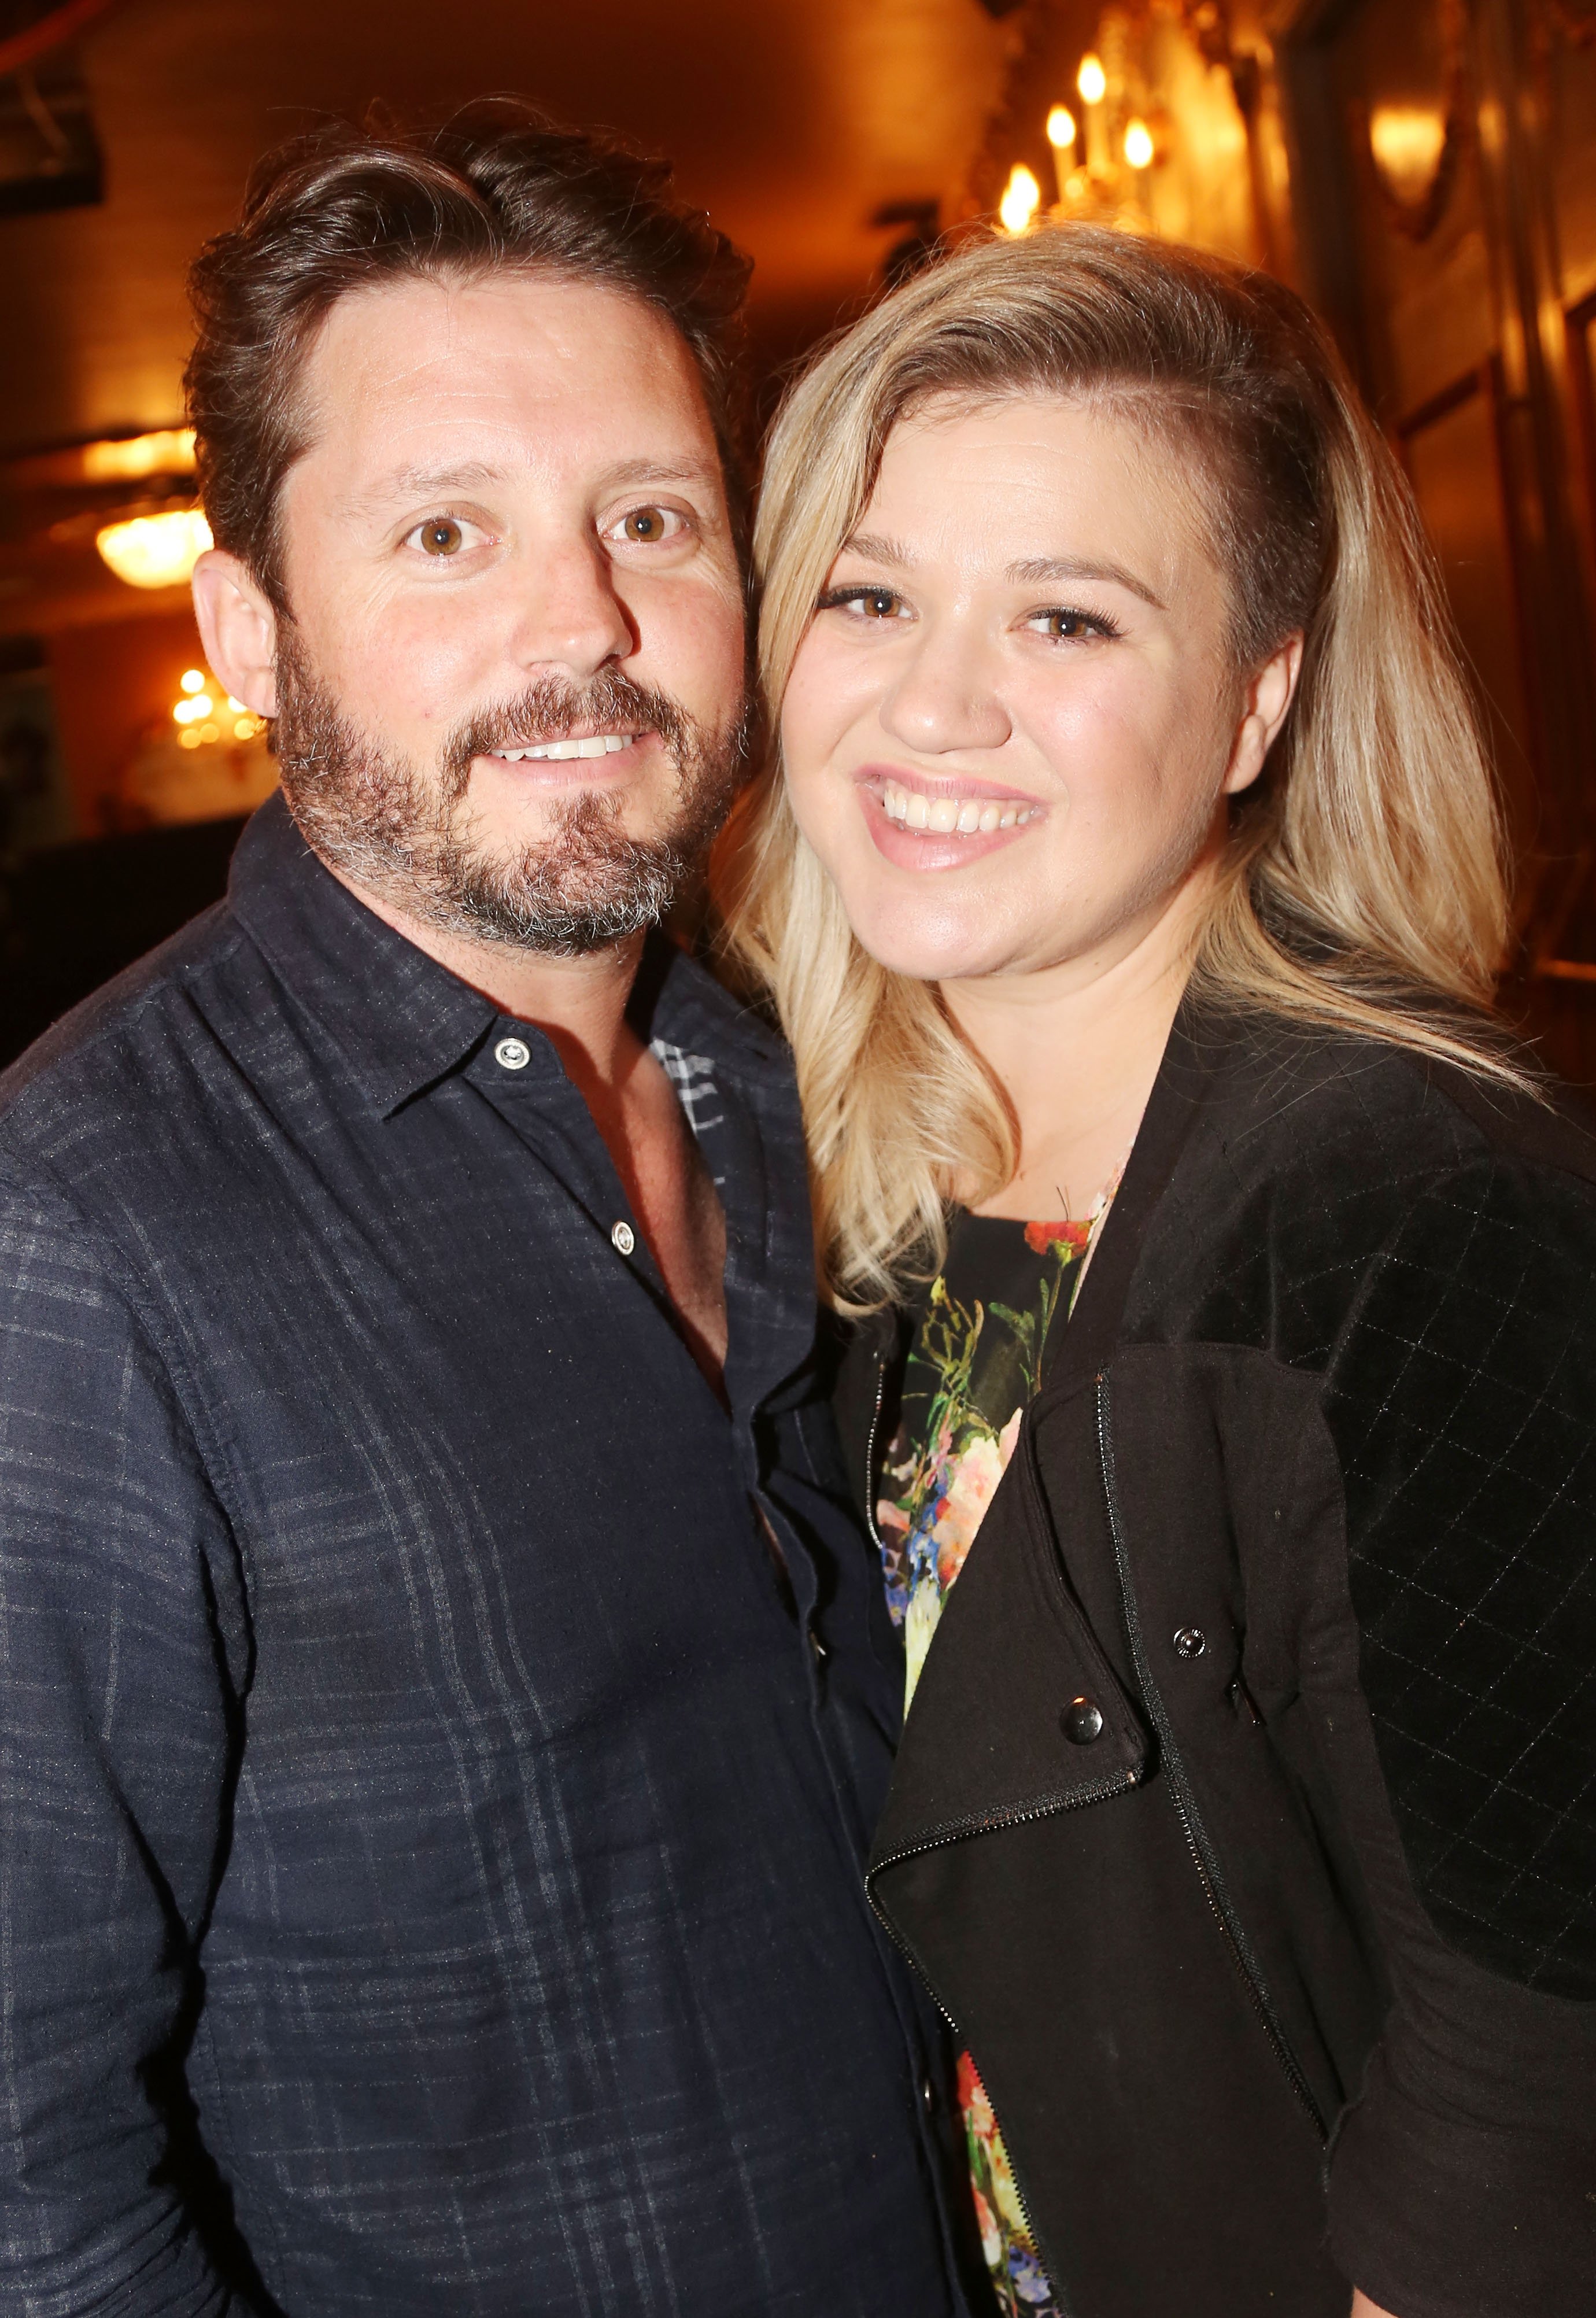 Brandon Blackstock and his wife Kelly Clarkson pose backstage at the hit musical "Finding Neverland" on Broadway at the Lunt Fontanne Theater on July 15, 2015 in New York City.  |  Source: Getty Images